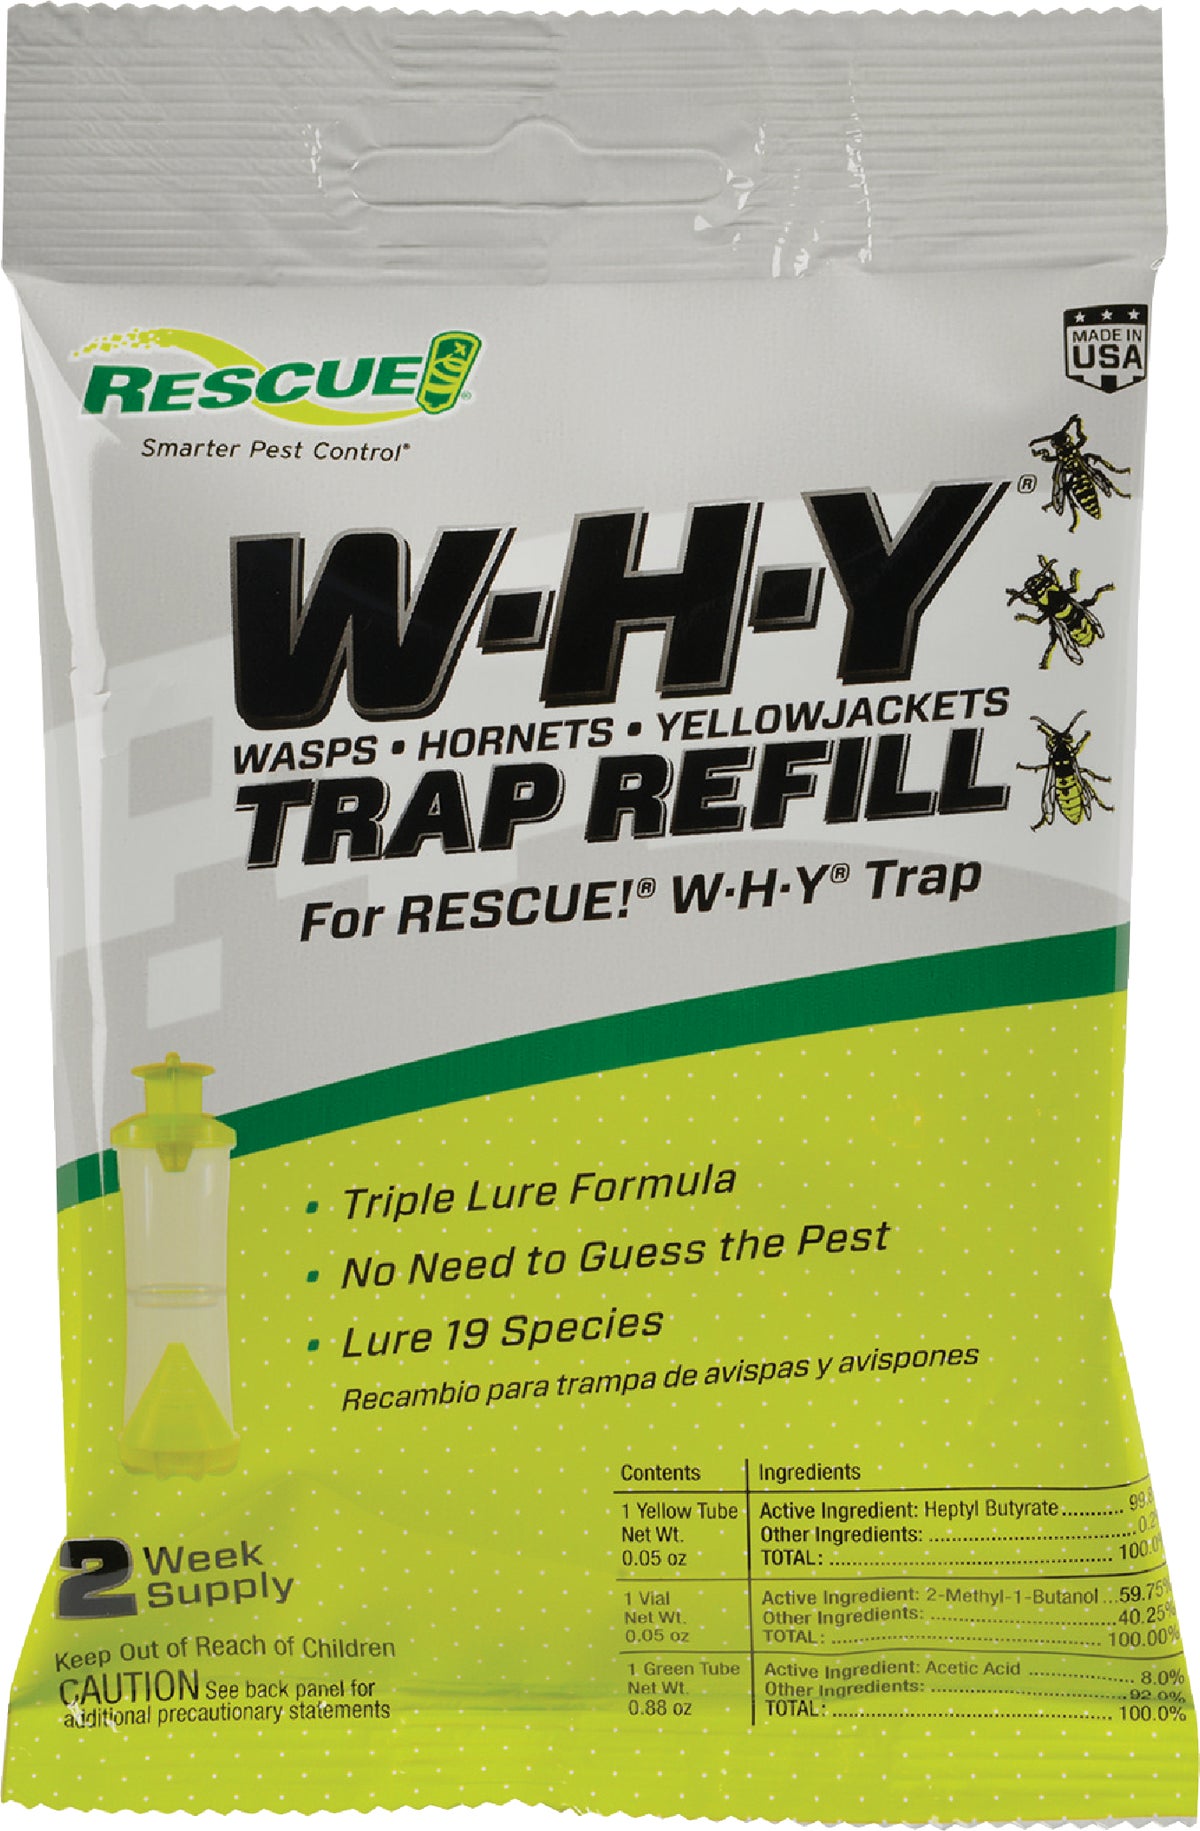 The RESCUE!® POP! Fly Trap